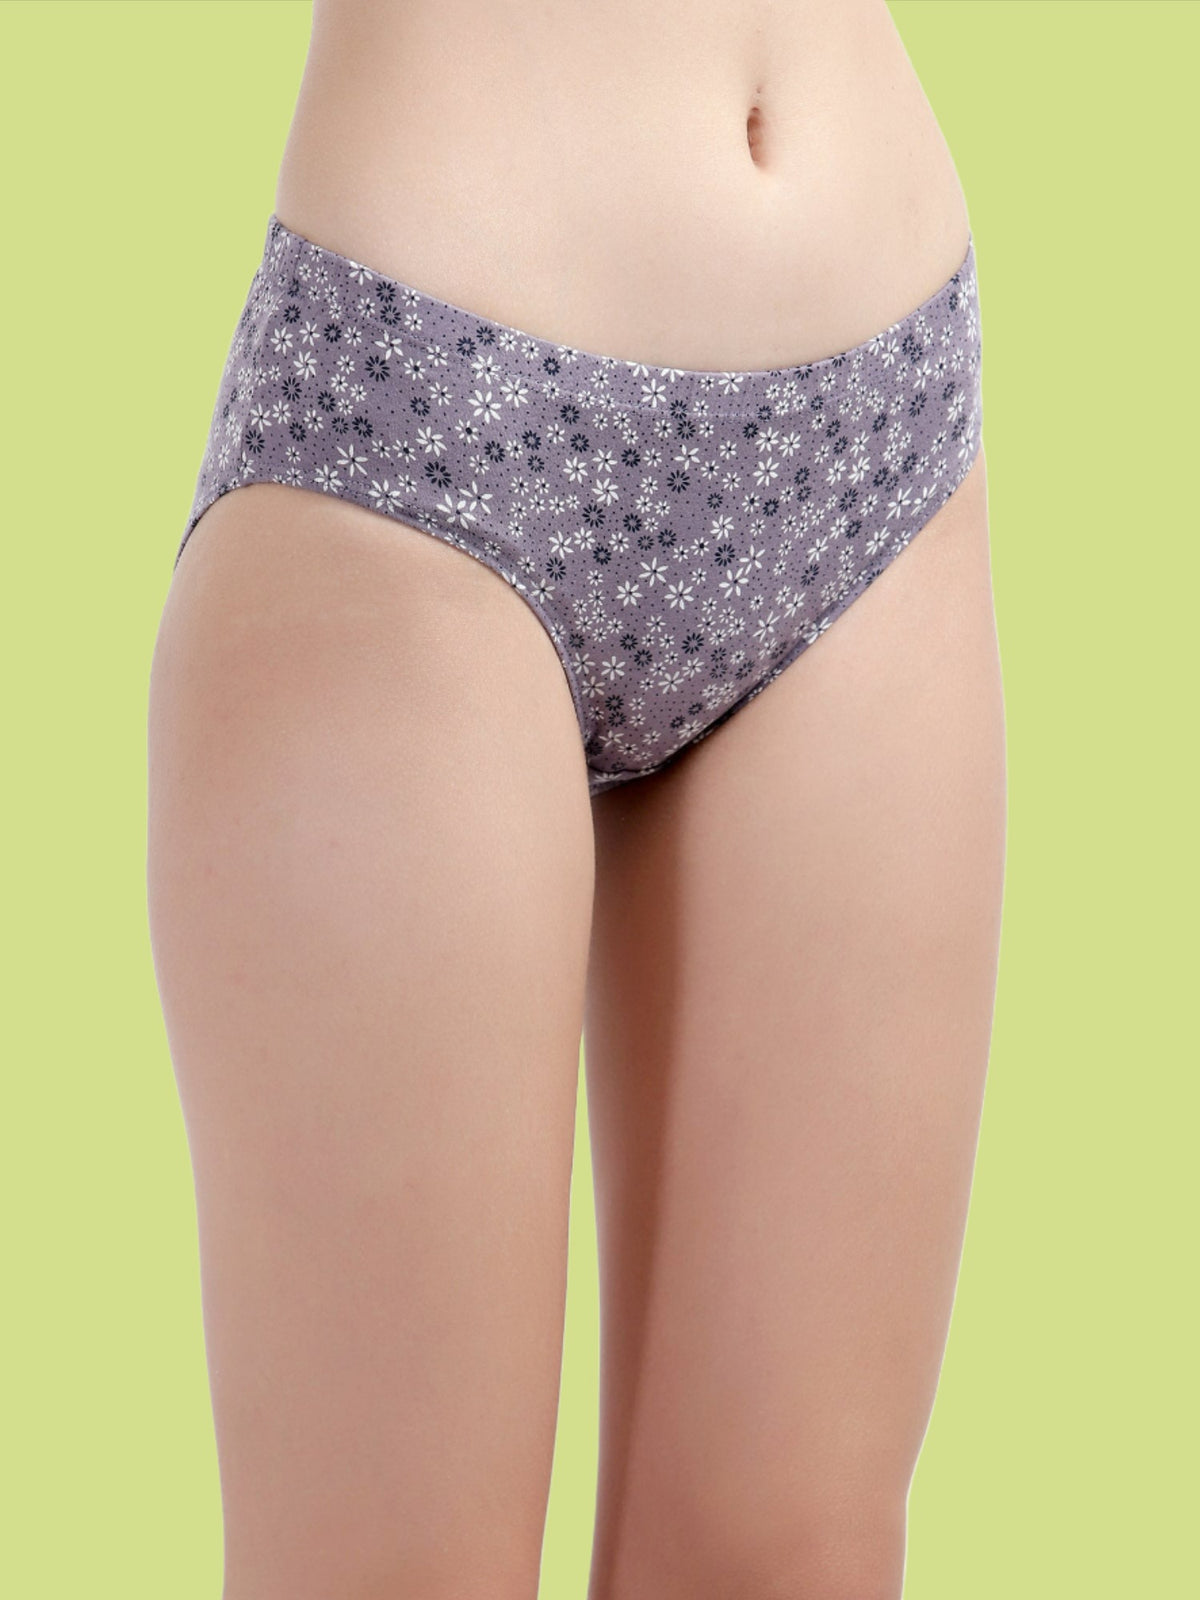 Pack Of 3 Assorted Printed Cotton Women Panties